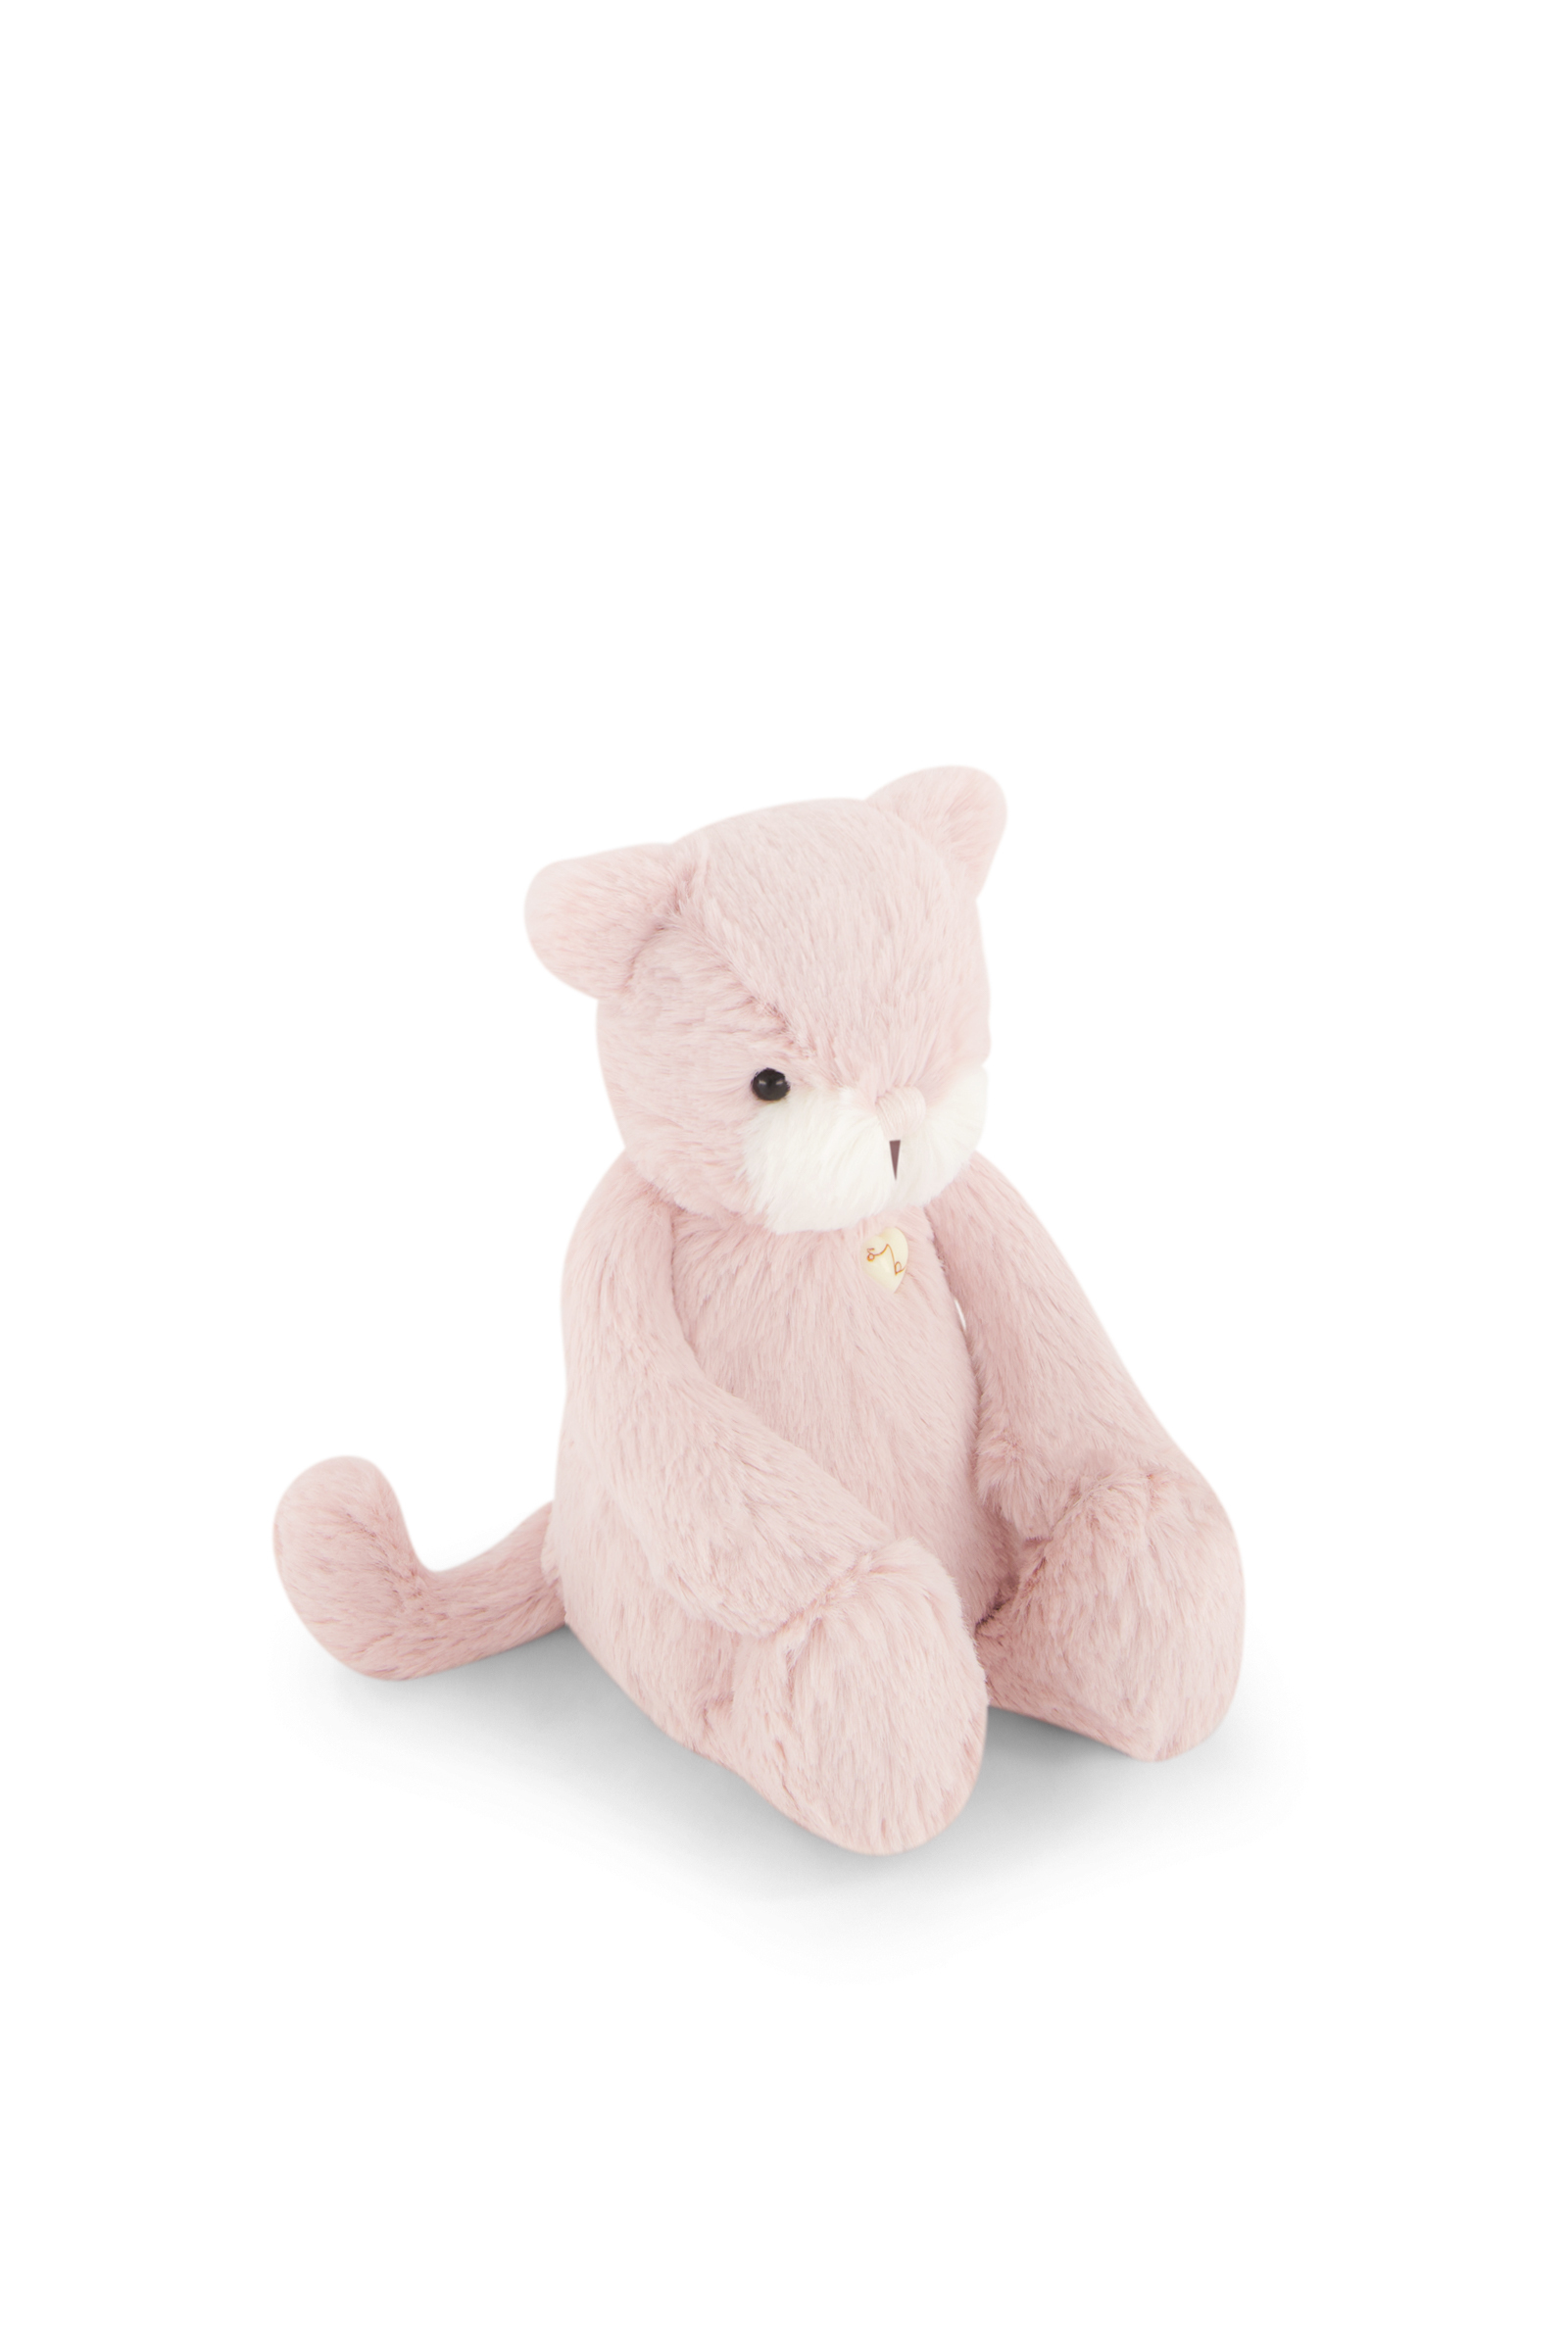 Snuggle Bunnies 20cm Elsie The Kitty - Blush Front_Side